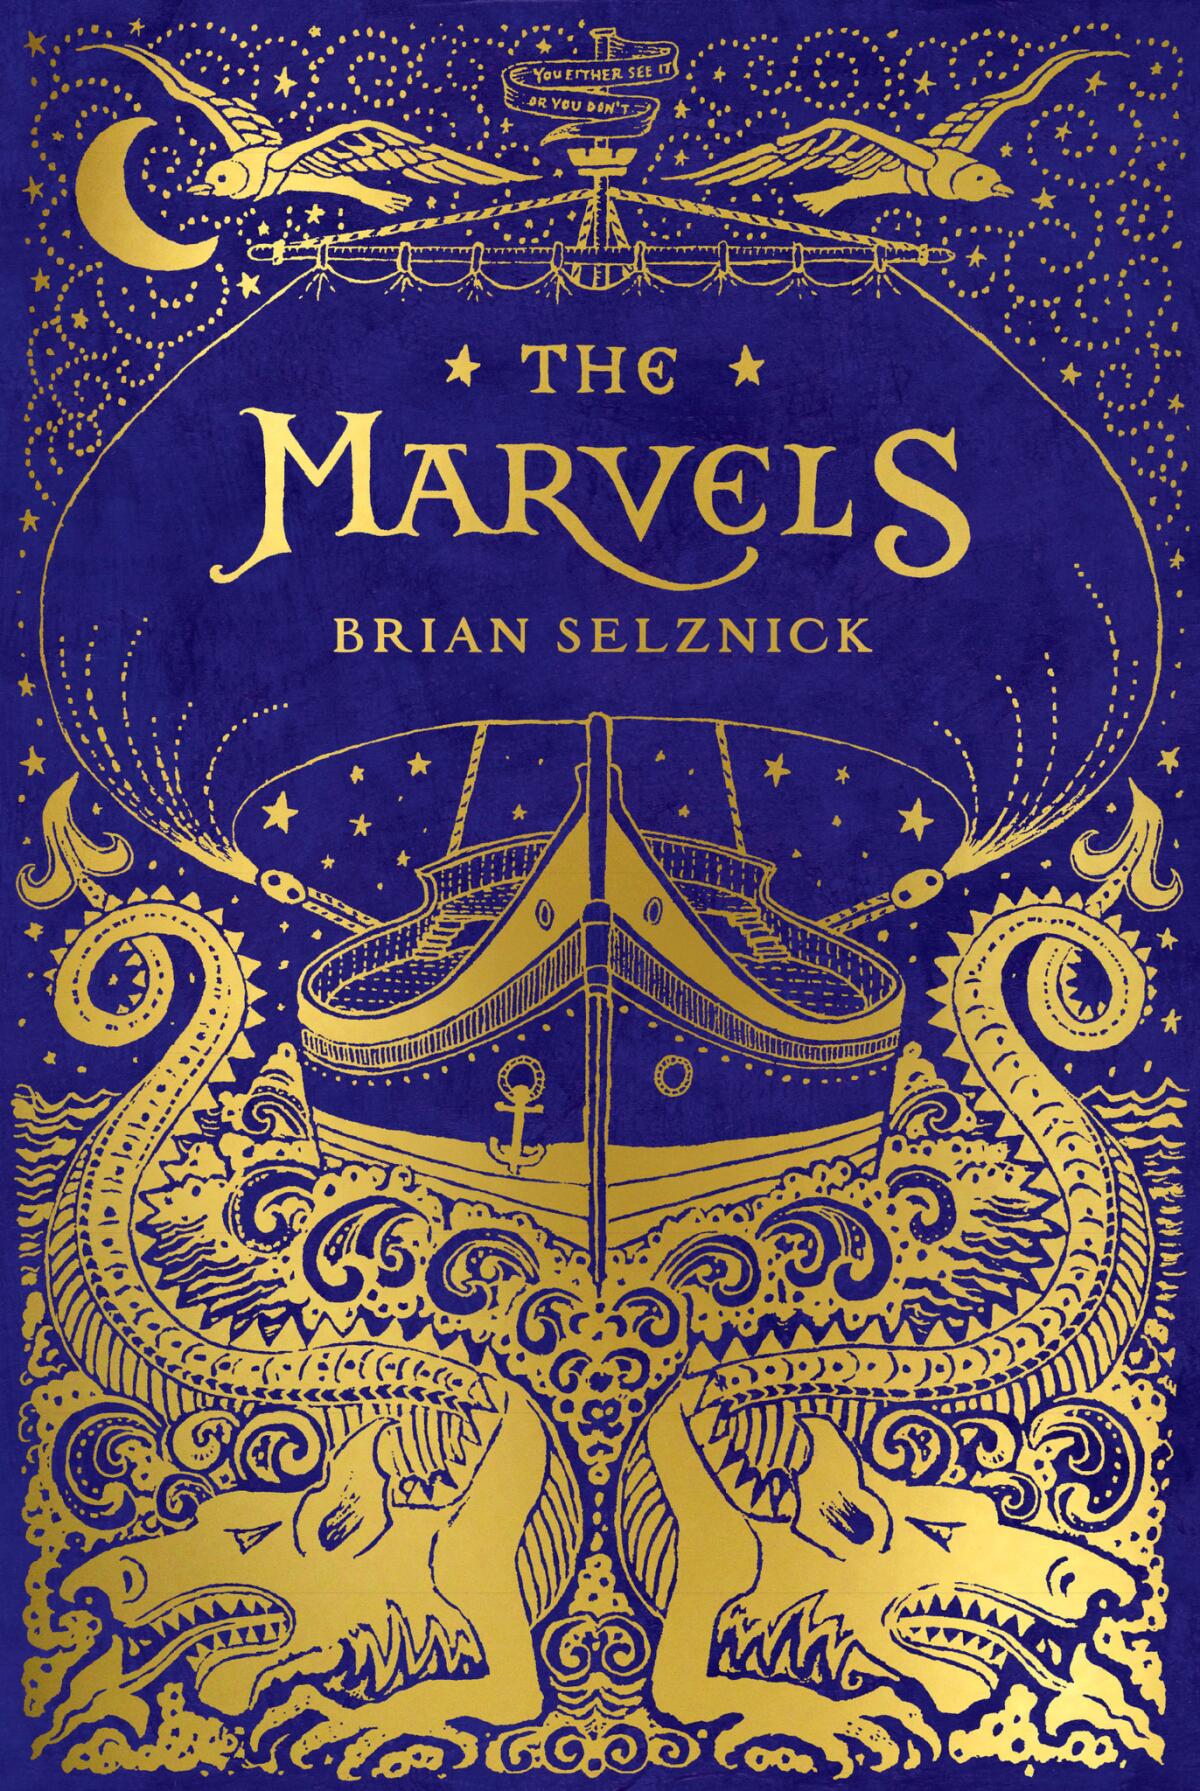 "The Marvels" by Brian Selznick